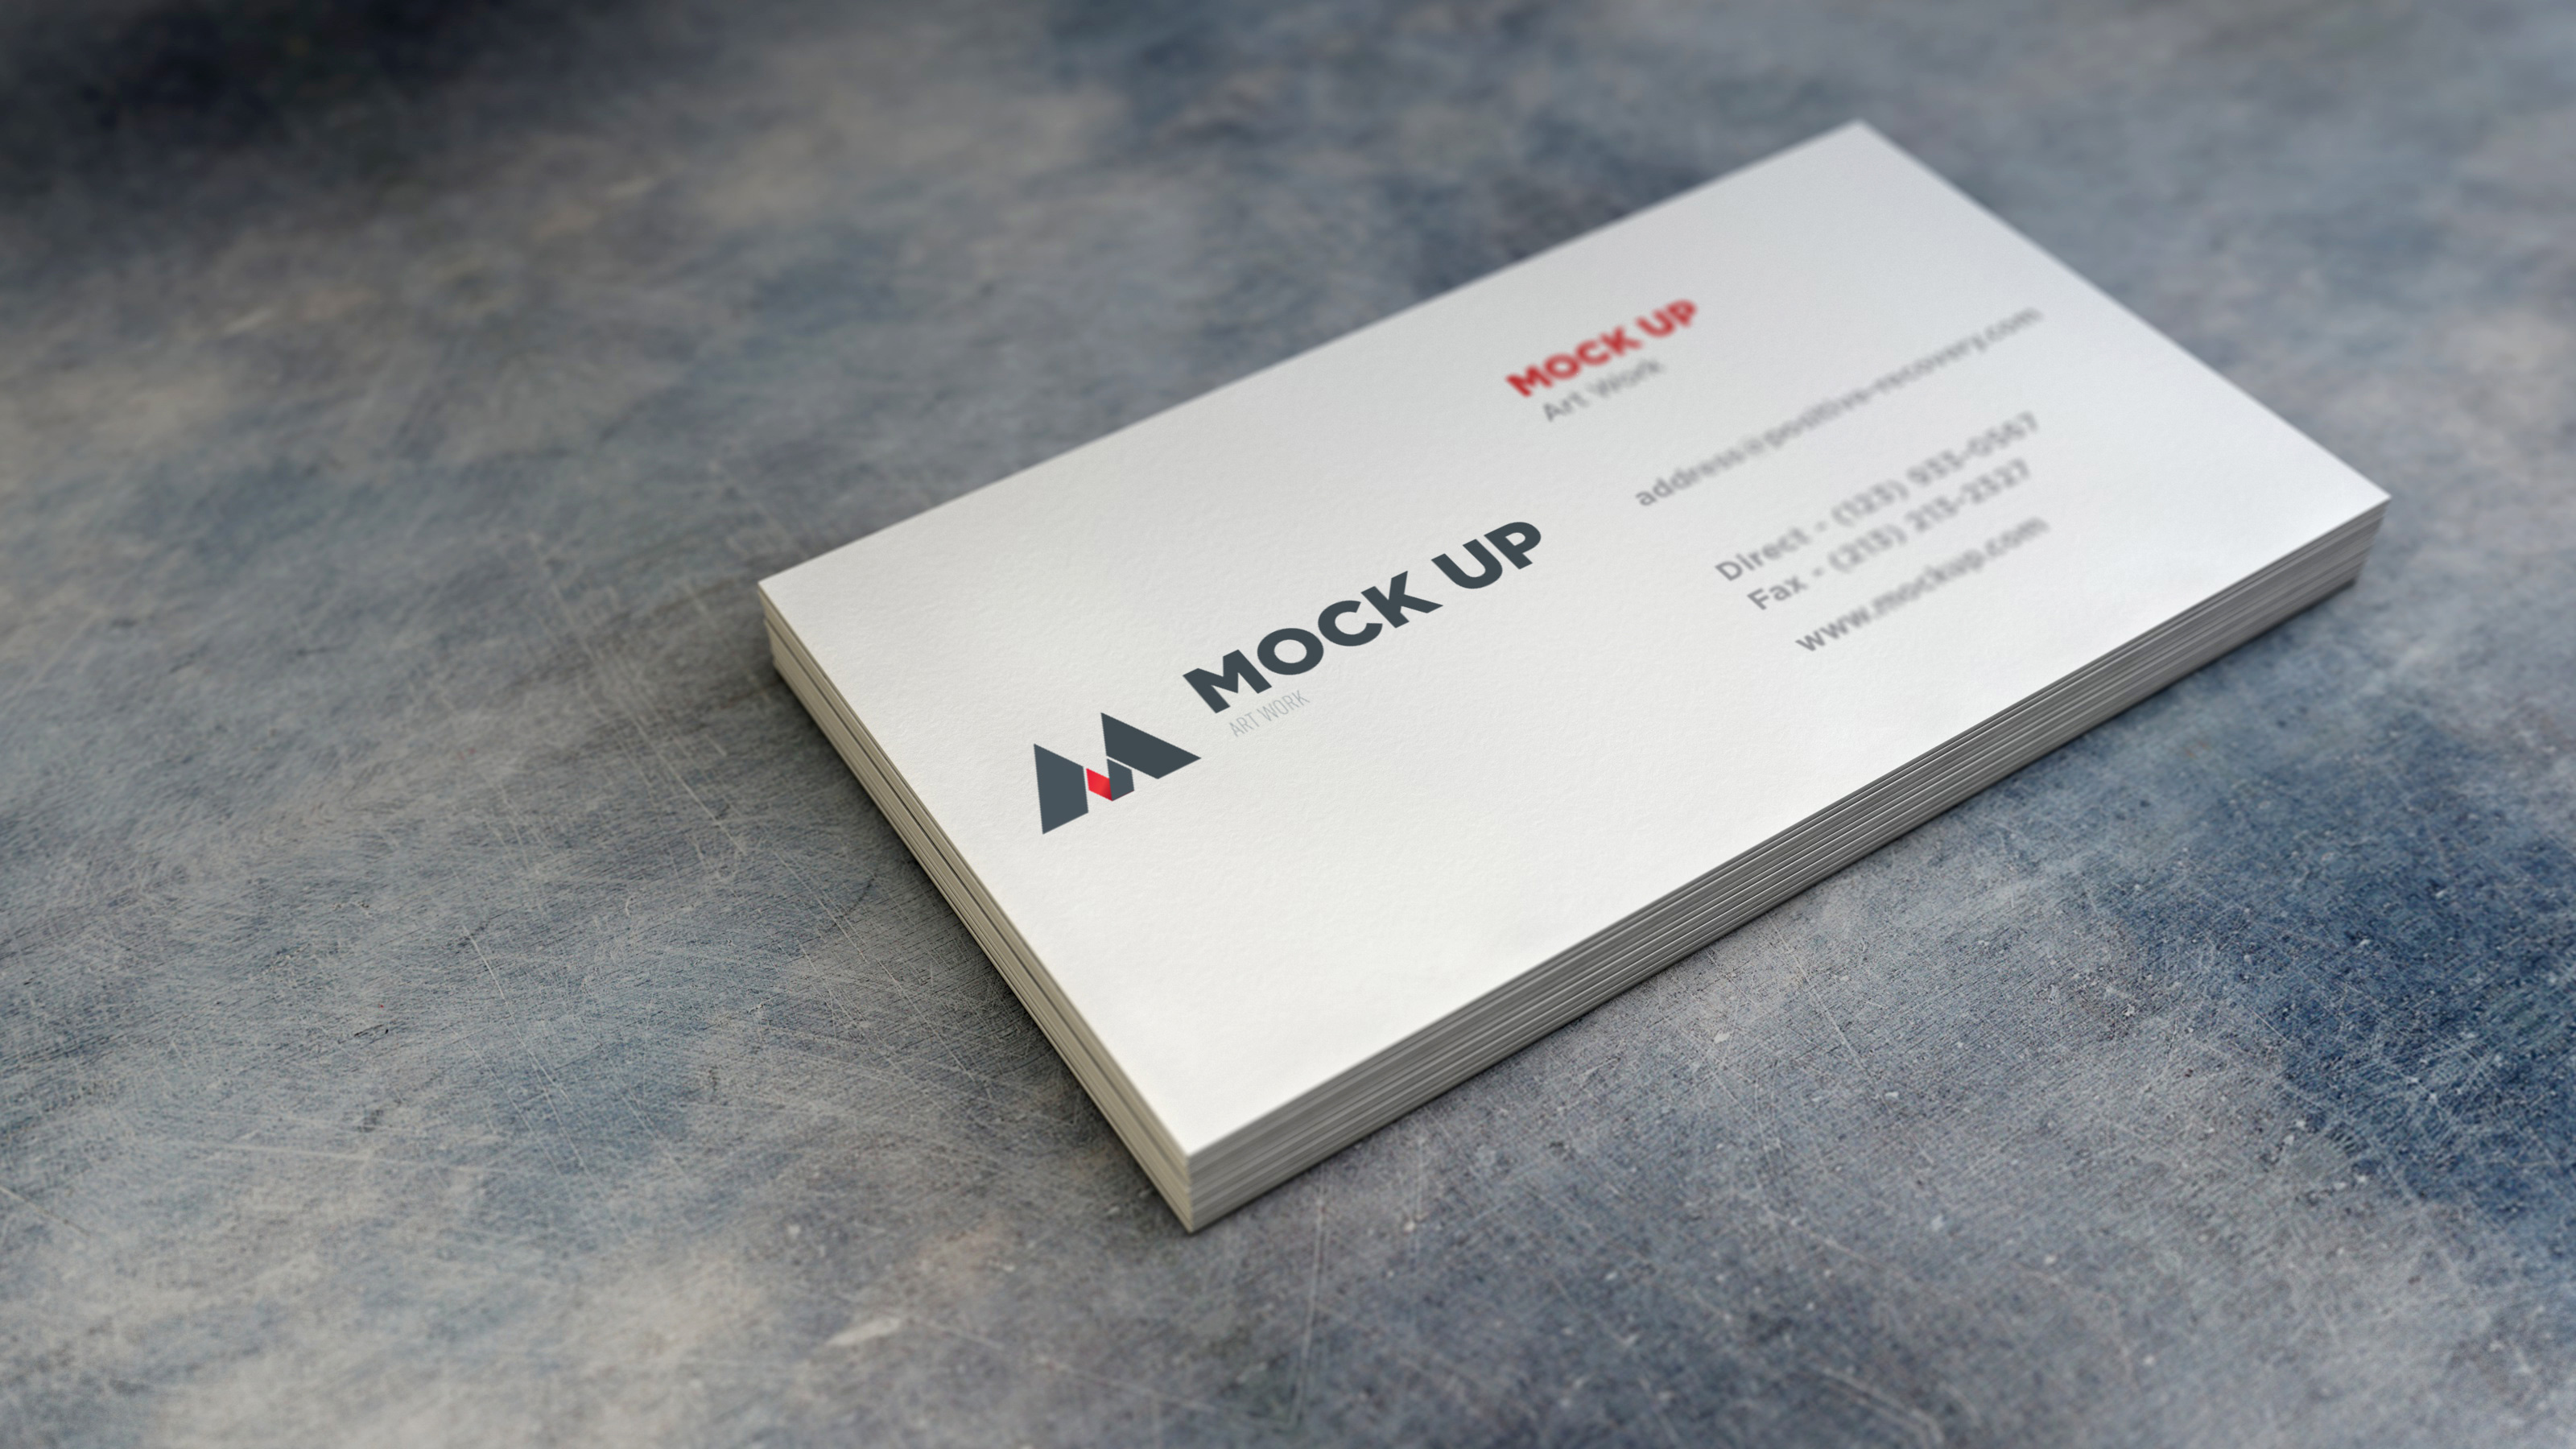 Realistic Business Card MockUp #2 | GraphicBurger